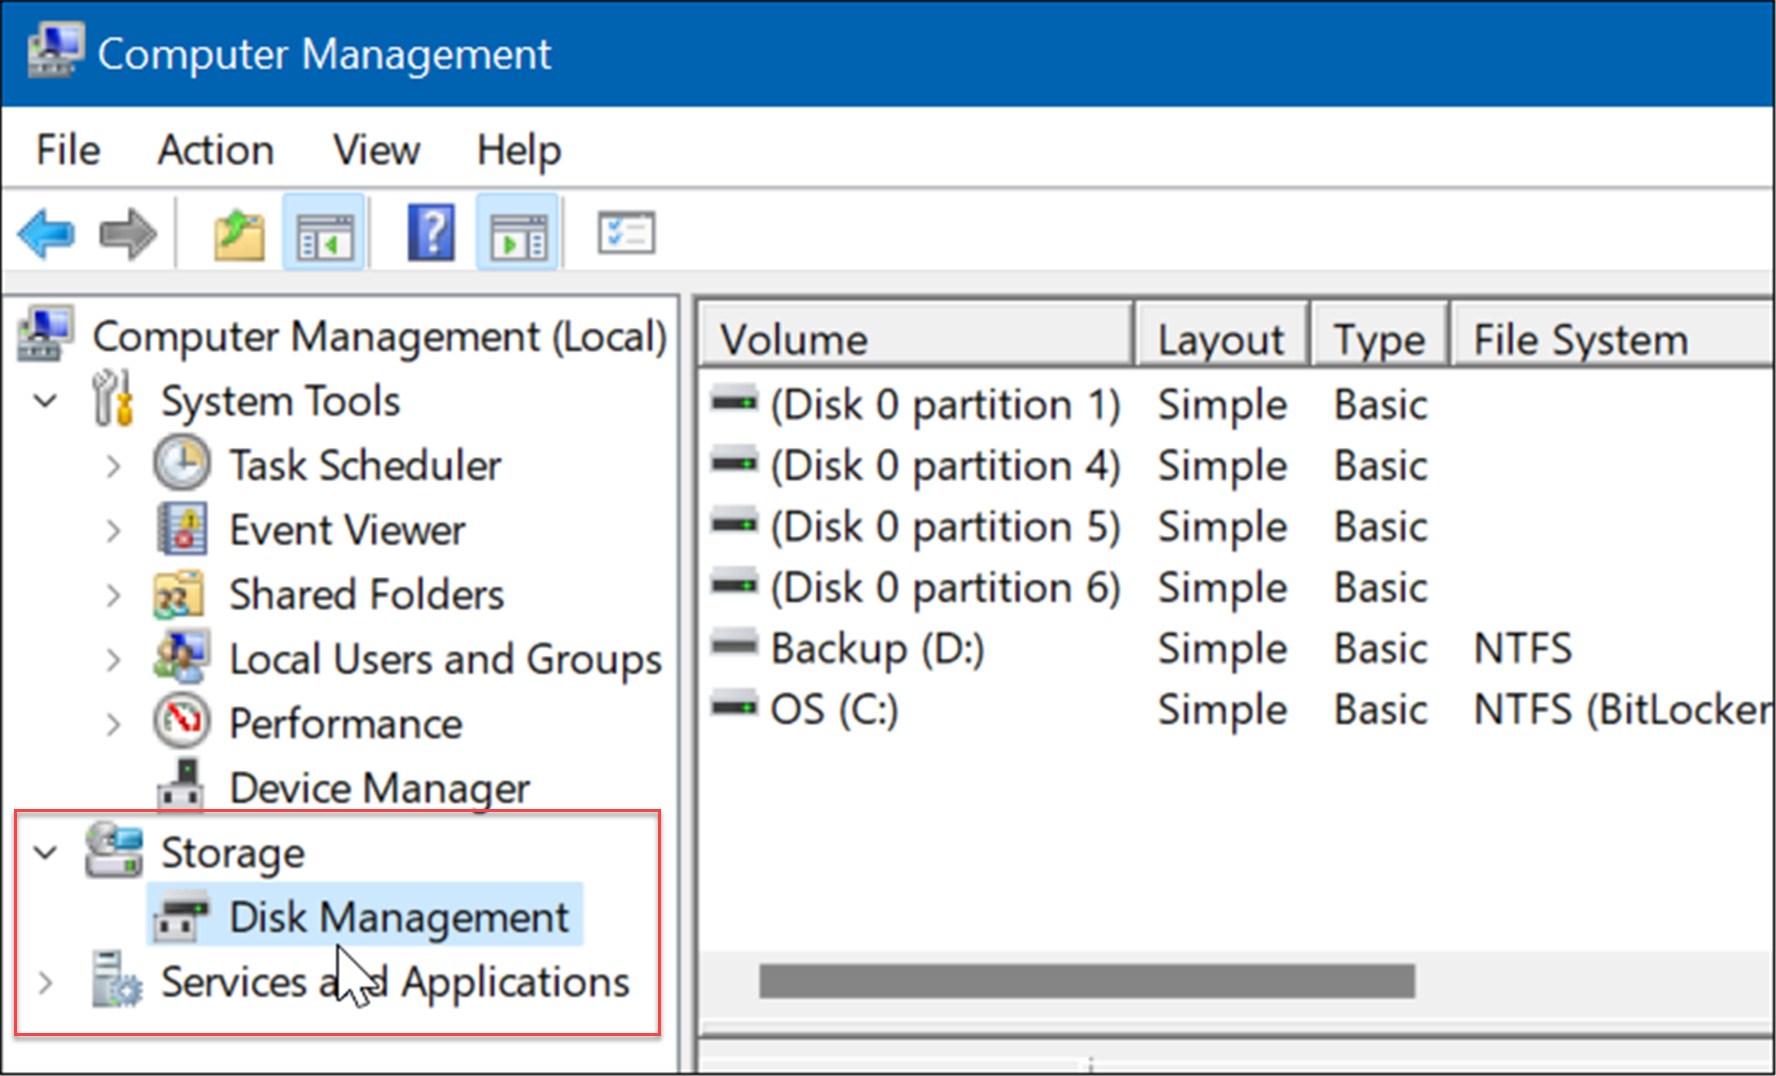 4-disk-management-in-Computer-Management-tool